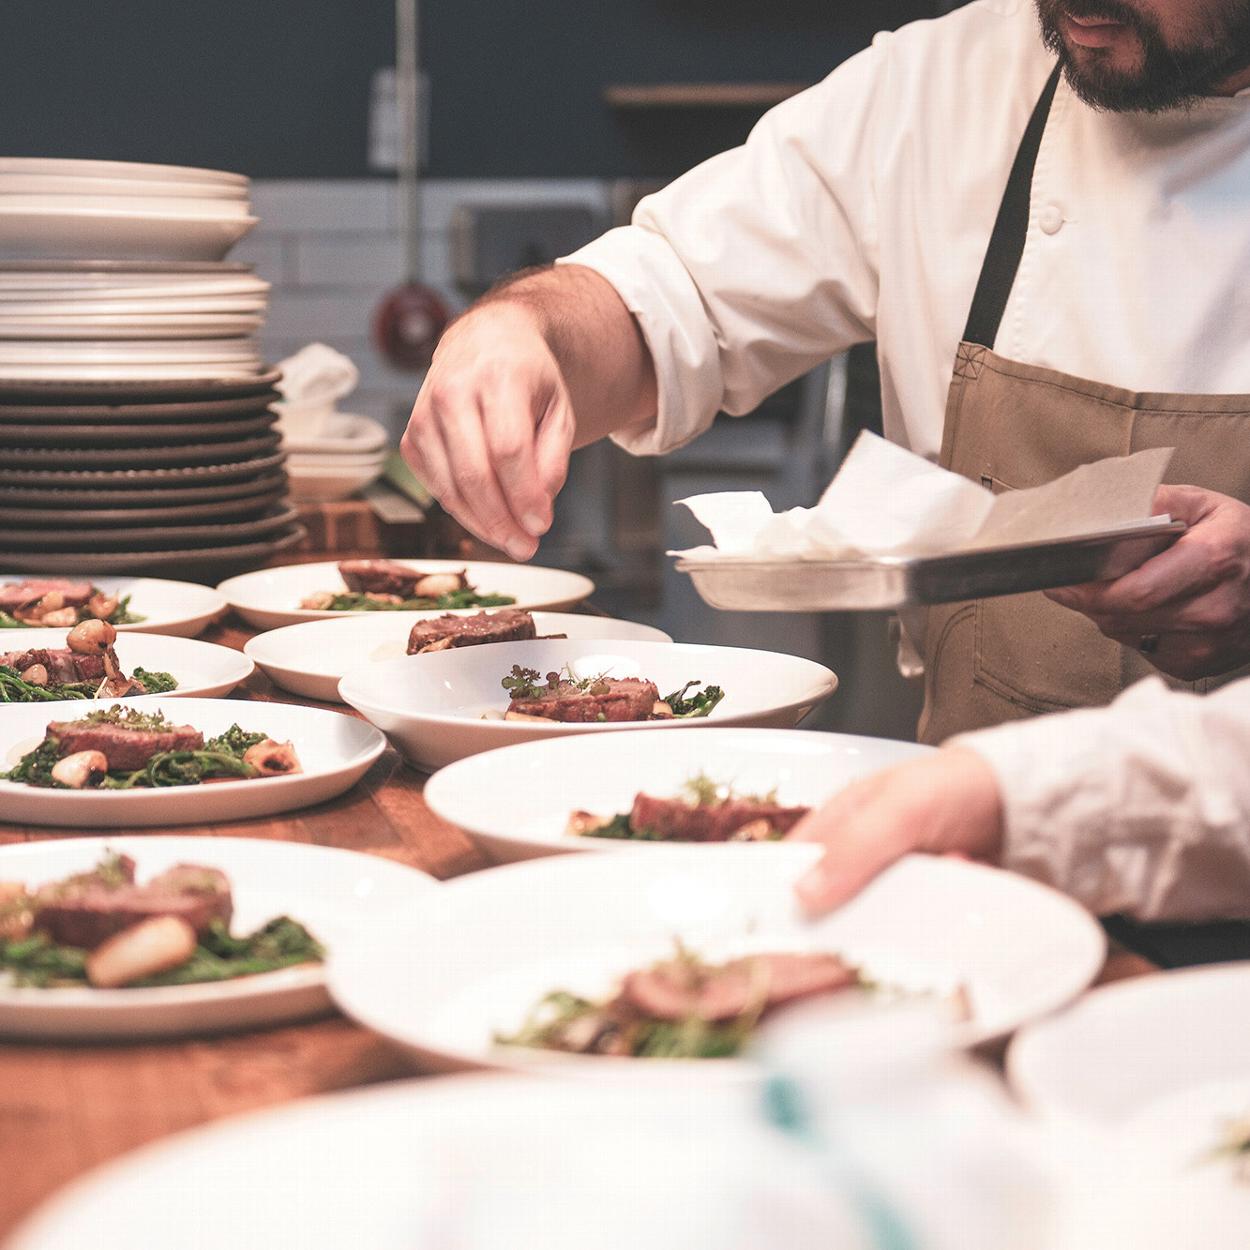 a chef sprinkling herbs on a number of plates for a catered event